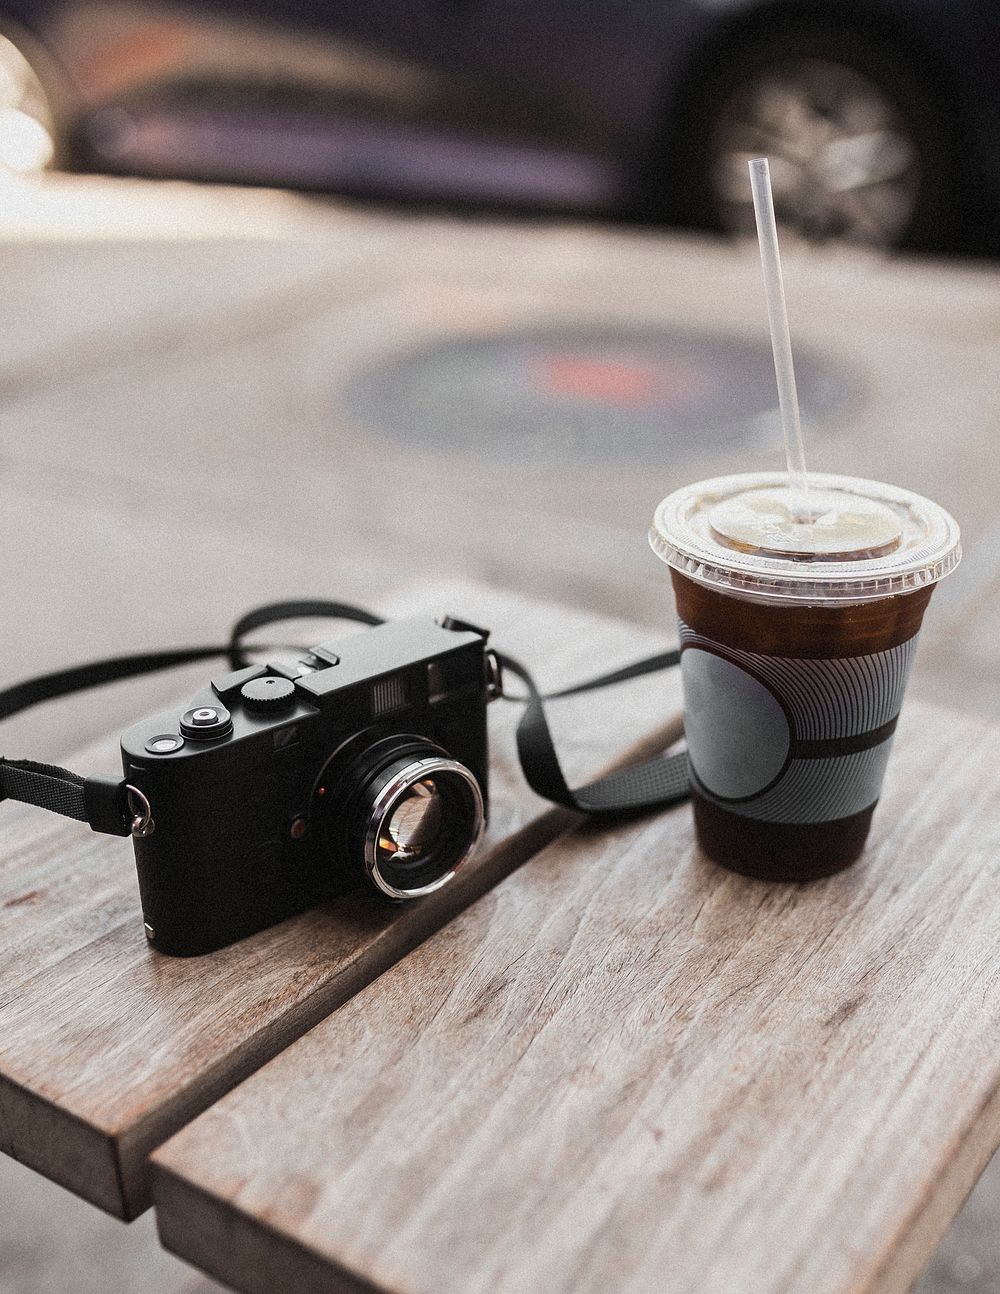 Take away iced coffee and a vintage camera on a table